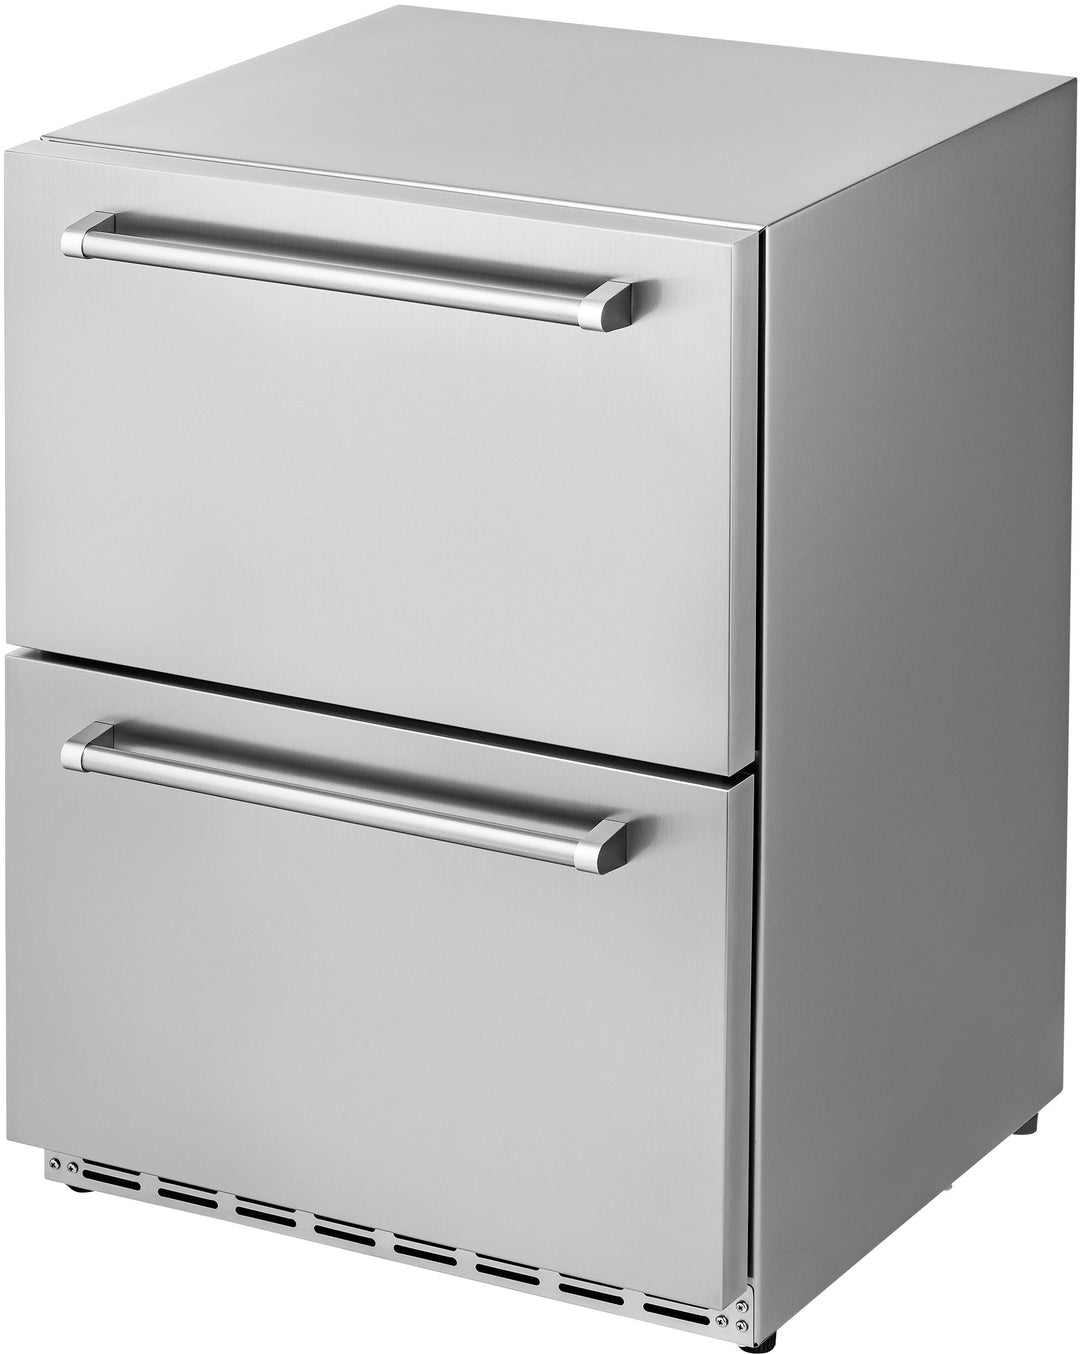 NewAir - 132-Can Built-in Commercial Grade Wine and Beverage Cooler with Dual Drawers - Stainless steel_6